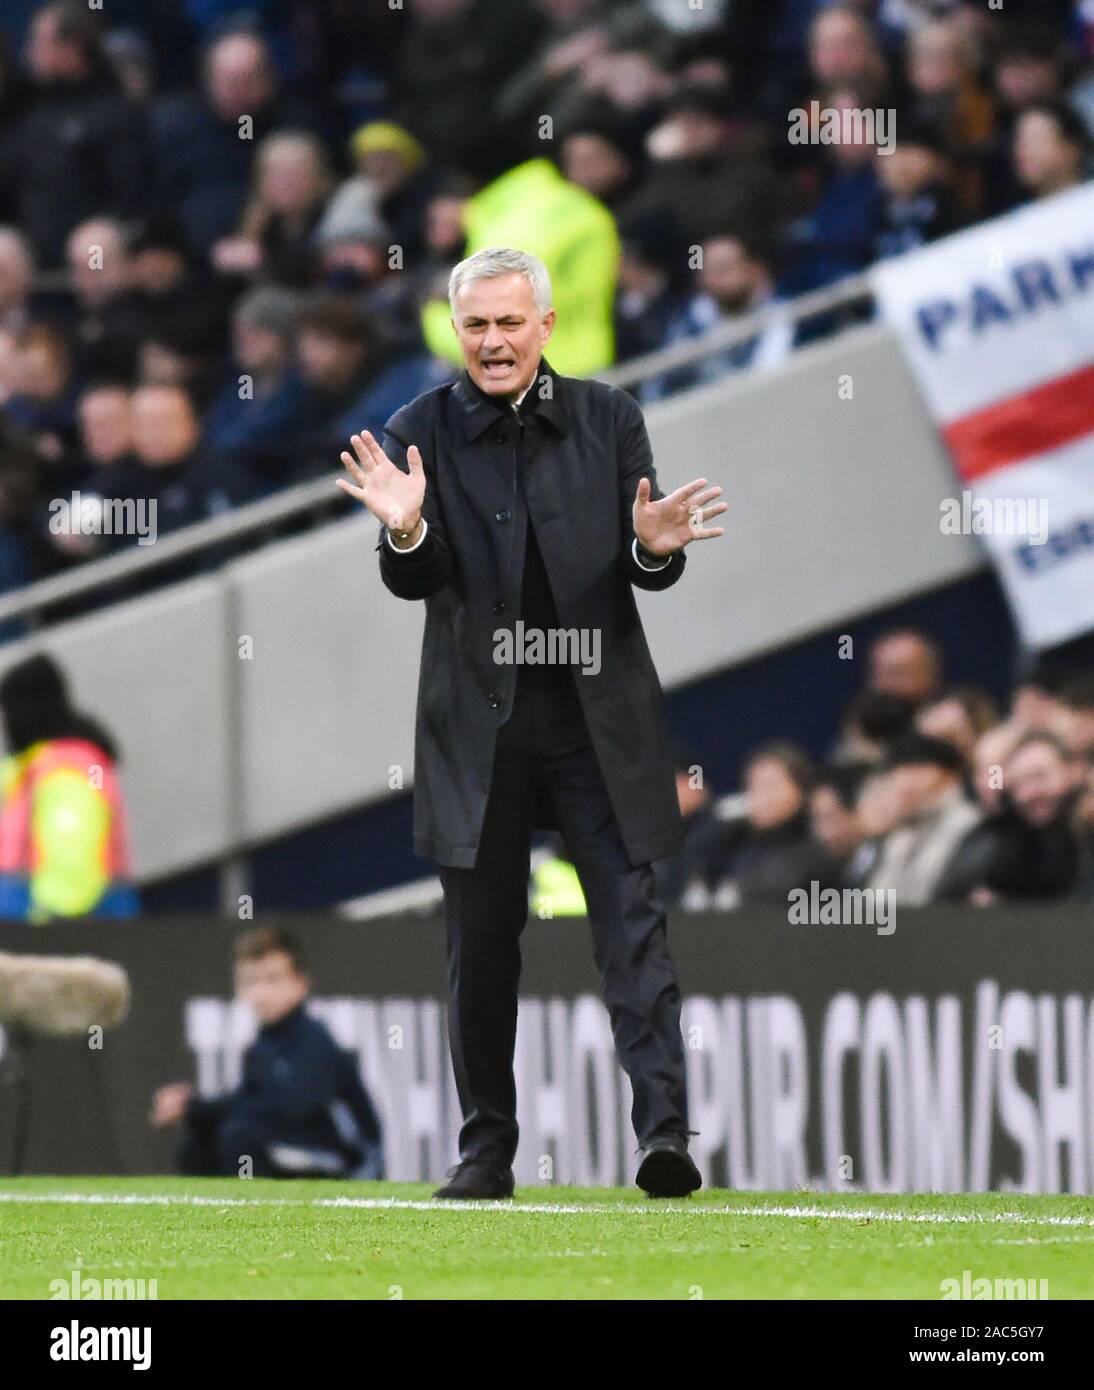 Jose Mourinho High Resolution Stock Photography And Images Alamy